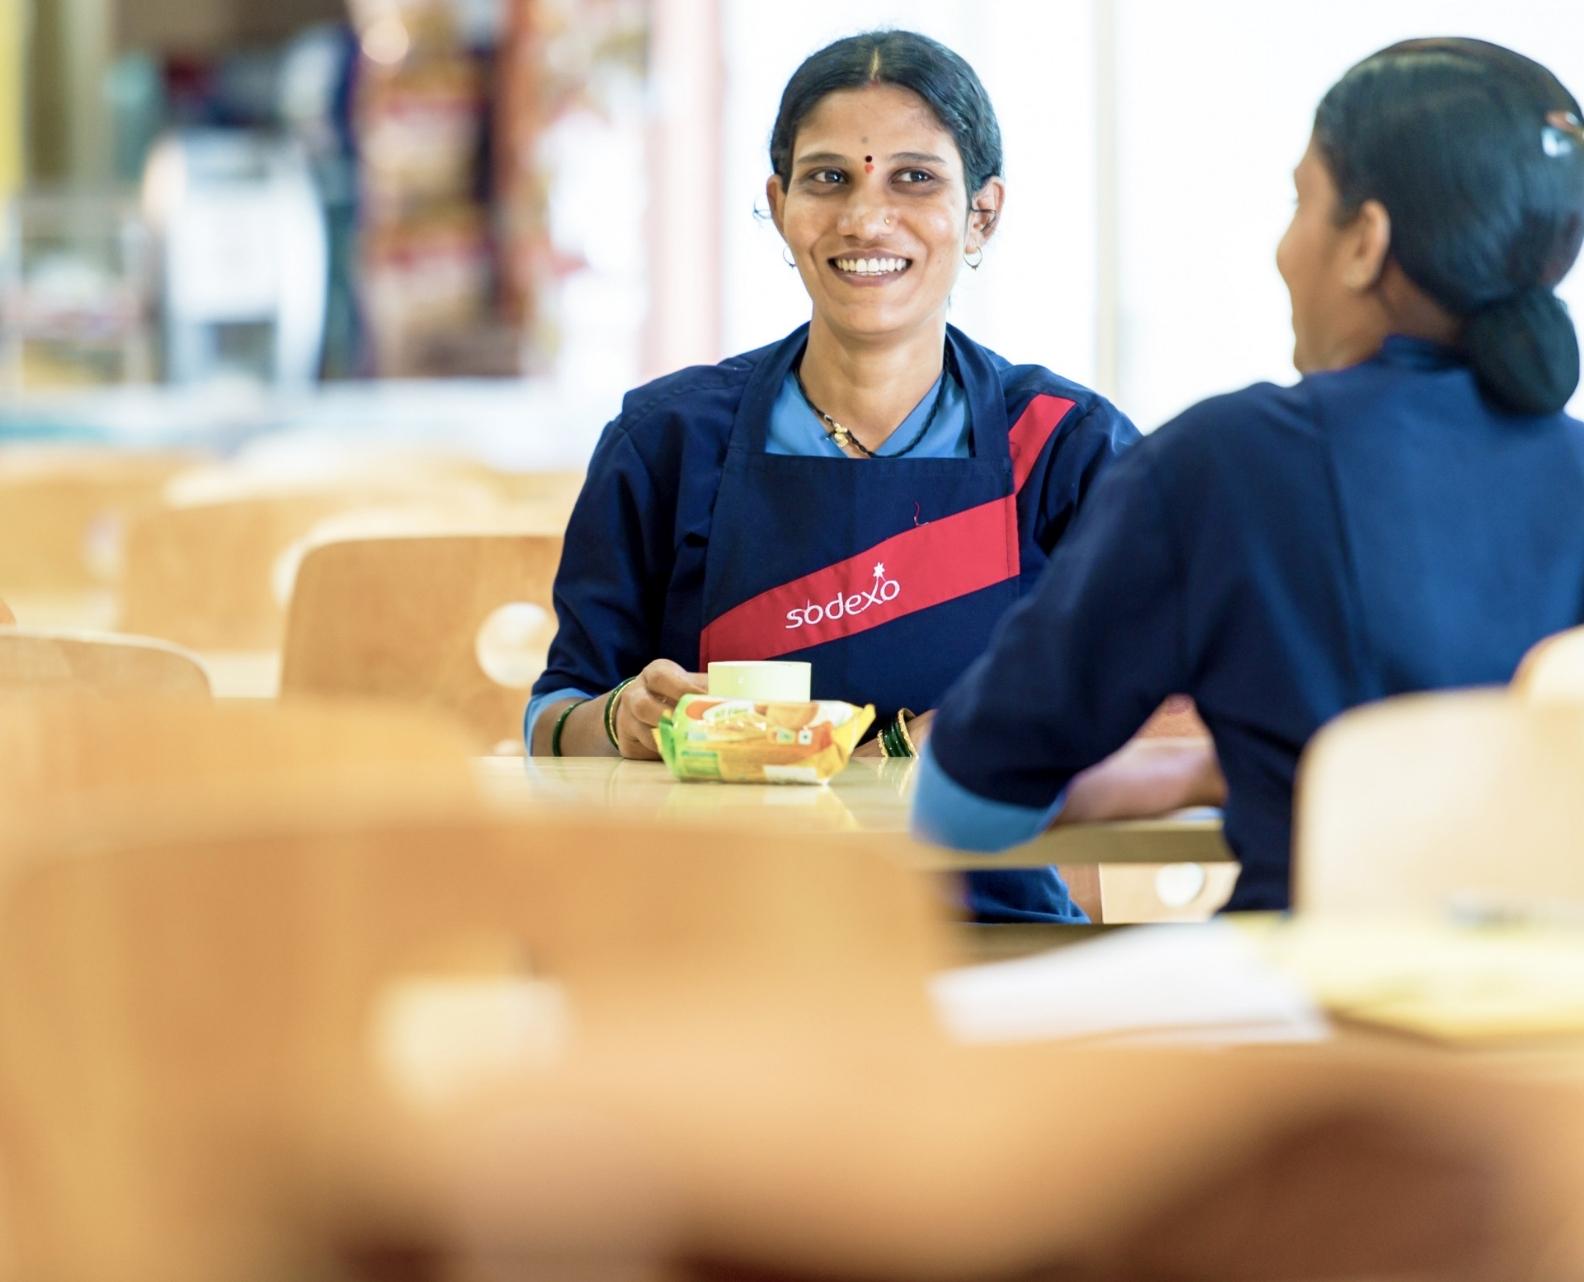 Sodexo aims to make on-campus nutrition fulfilling in educational institutions